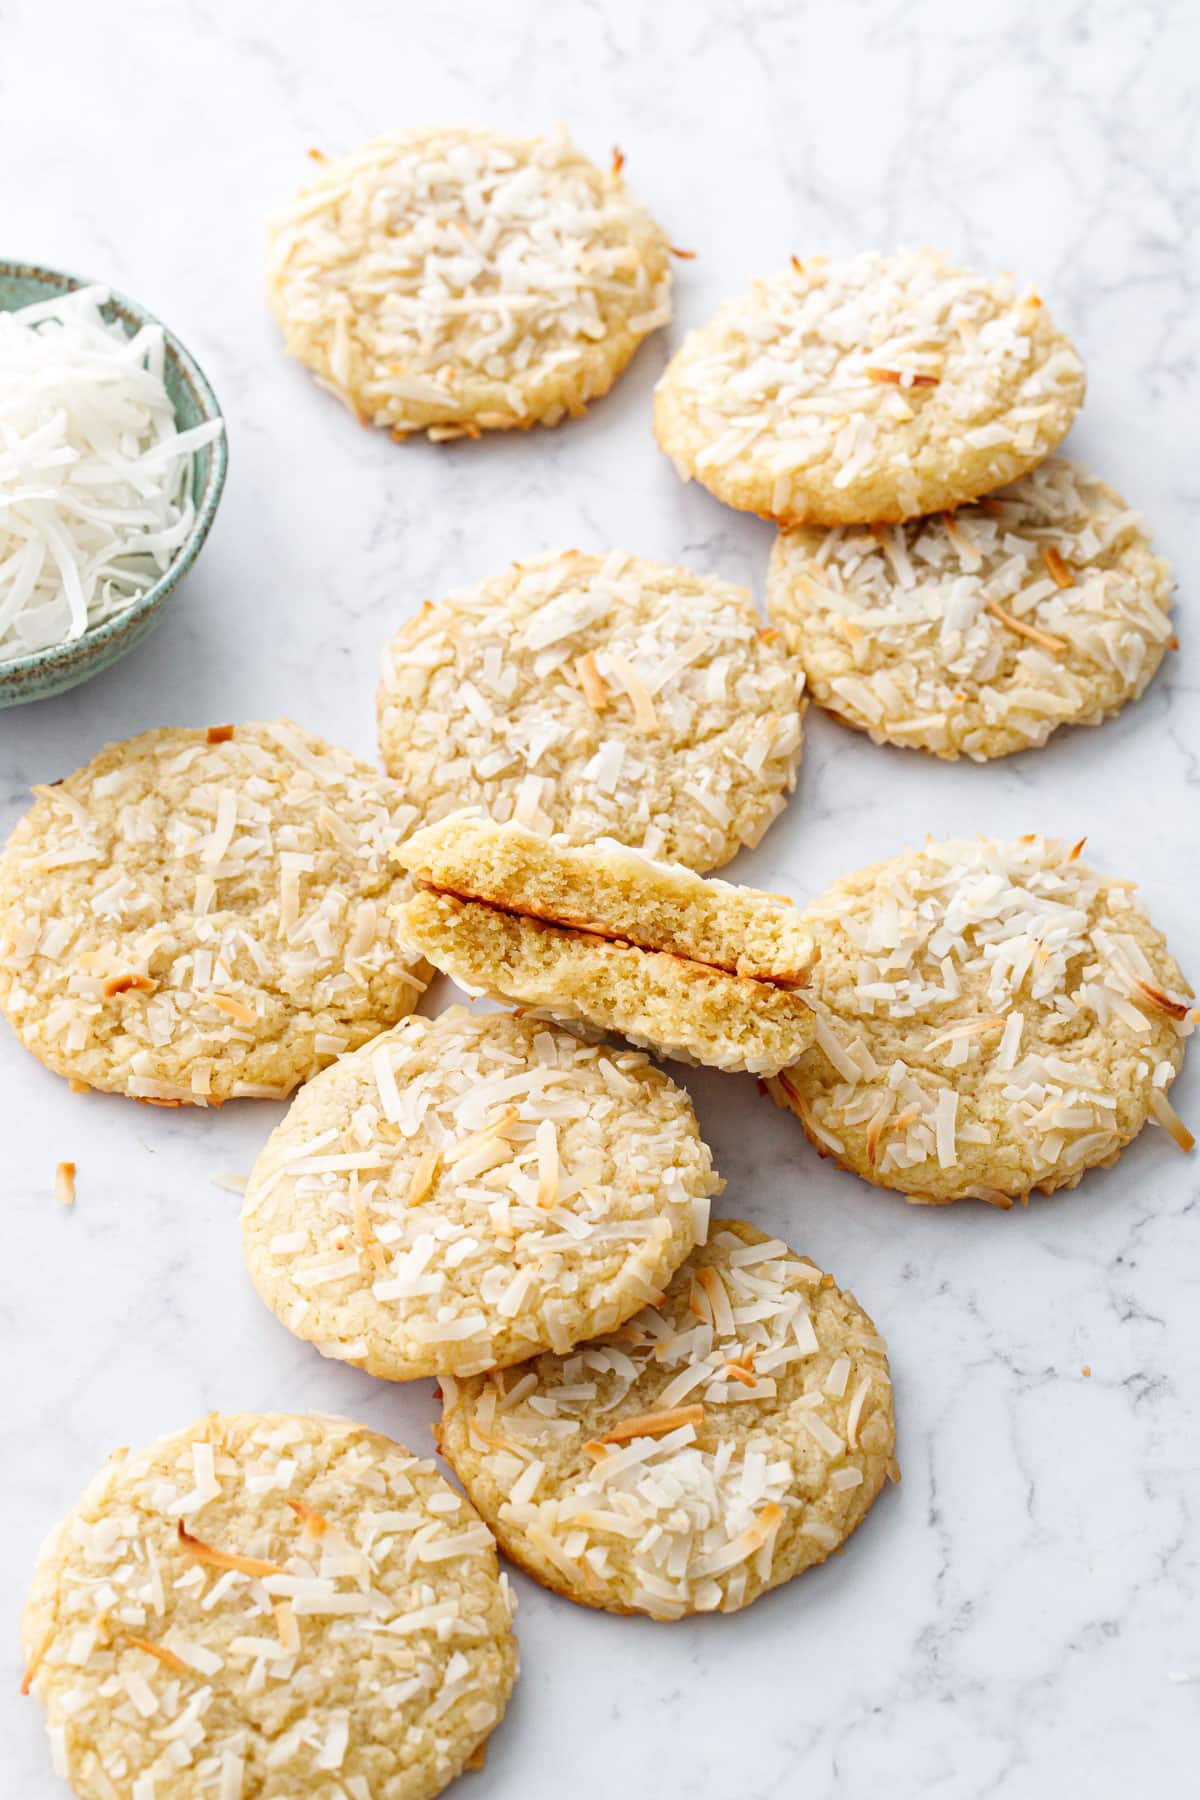 Messy arrangement of Toasted Coconut Sugar Cookies on a marble background, one cookie broken in half to show the inside texture.